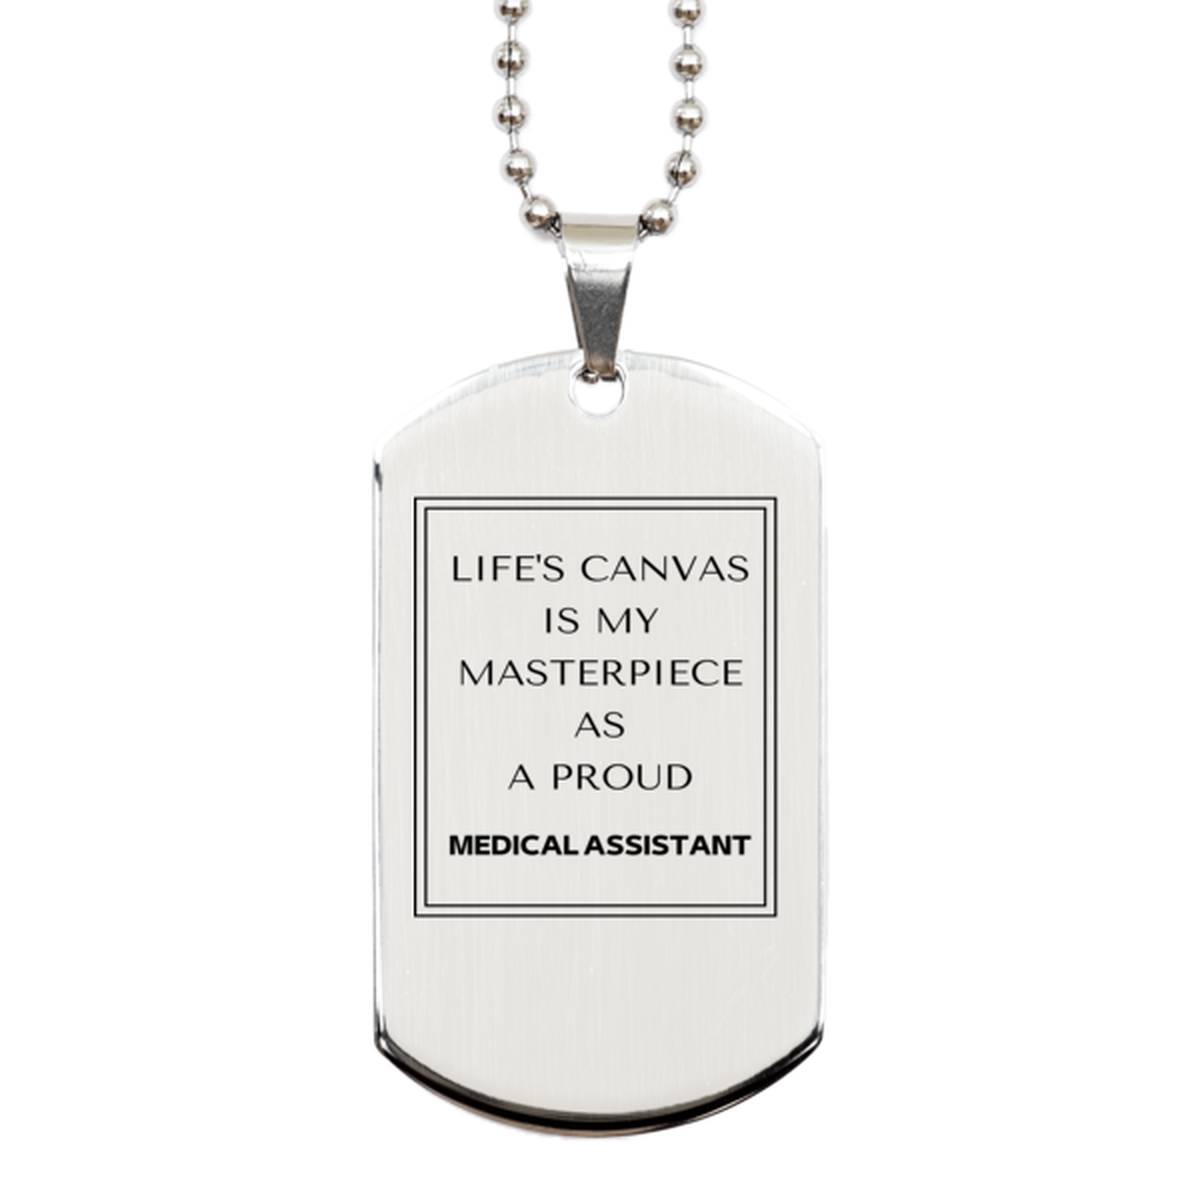 Proud Medical Assistant Gifts, Life's canvas is my masterpiece, Epic Birthday Christmas Unique Silver Dog Tag For Medical Assistant, Coworkers, Men, Women, Friends